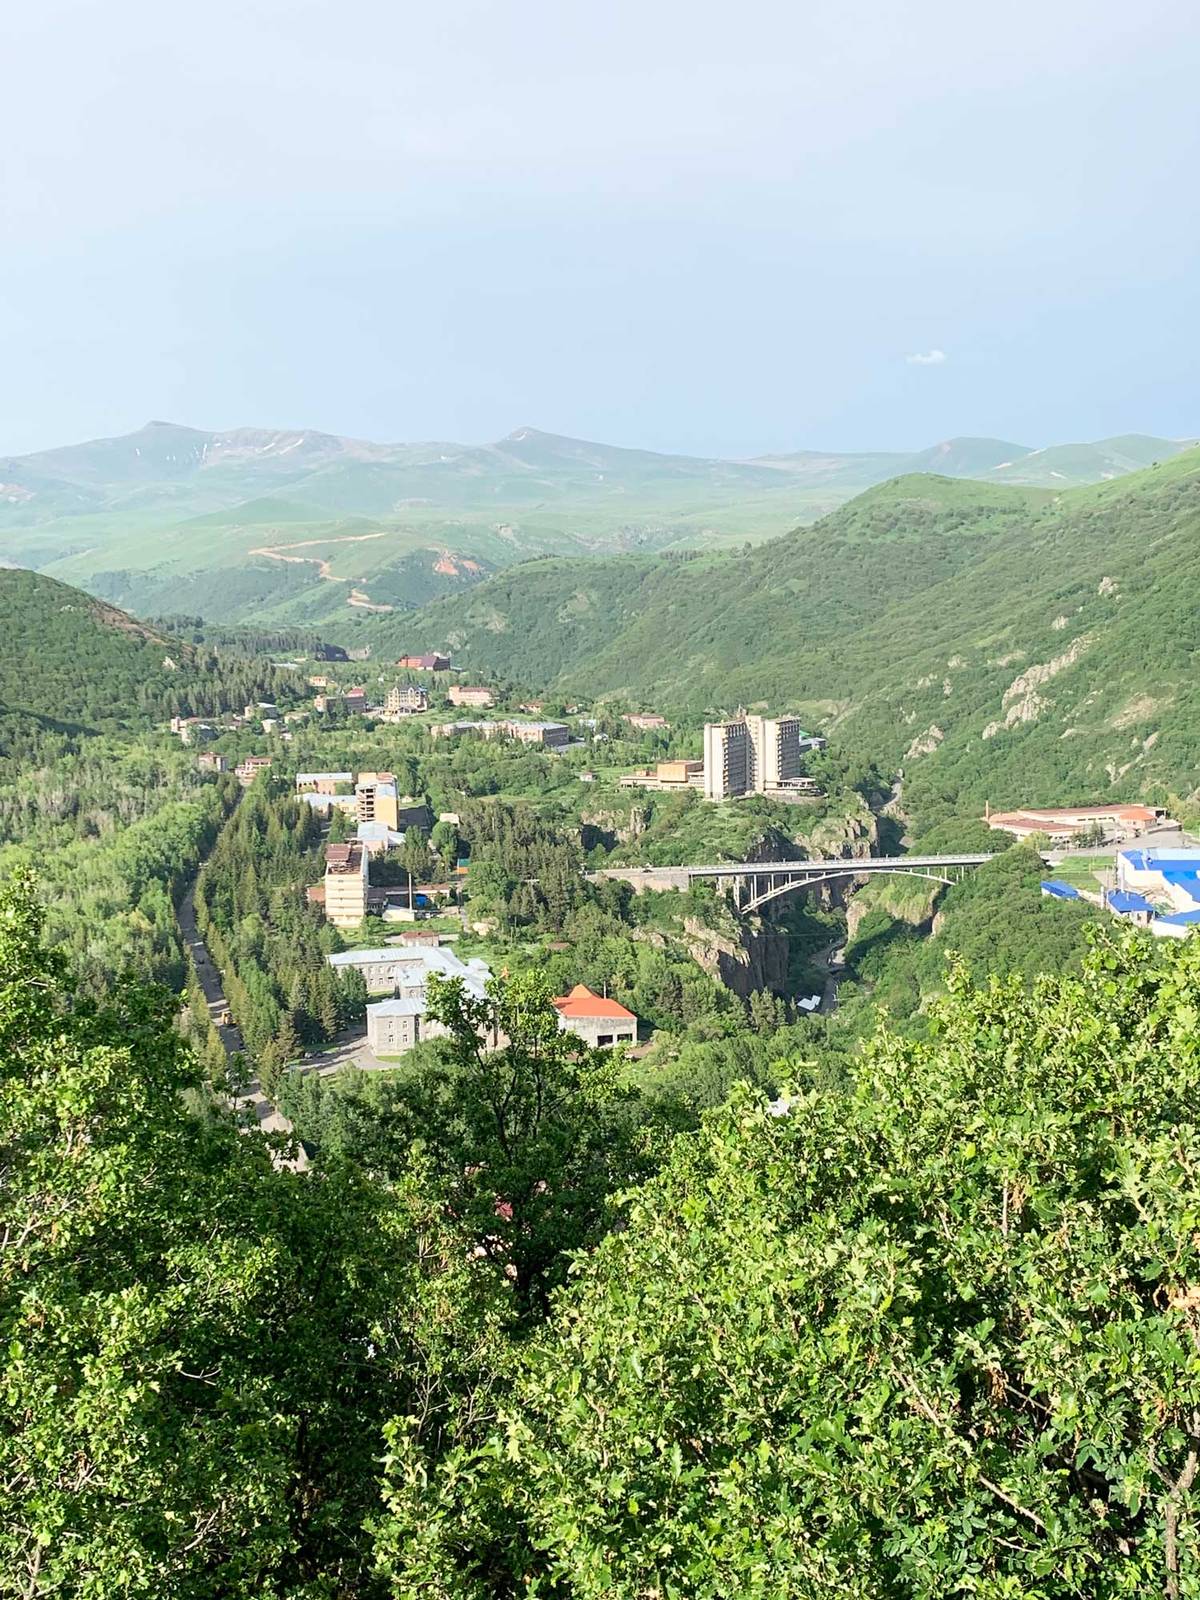 A view of Jermuk, looking toward the front line